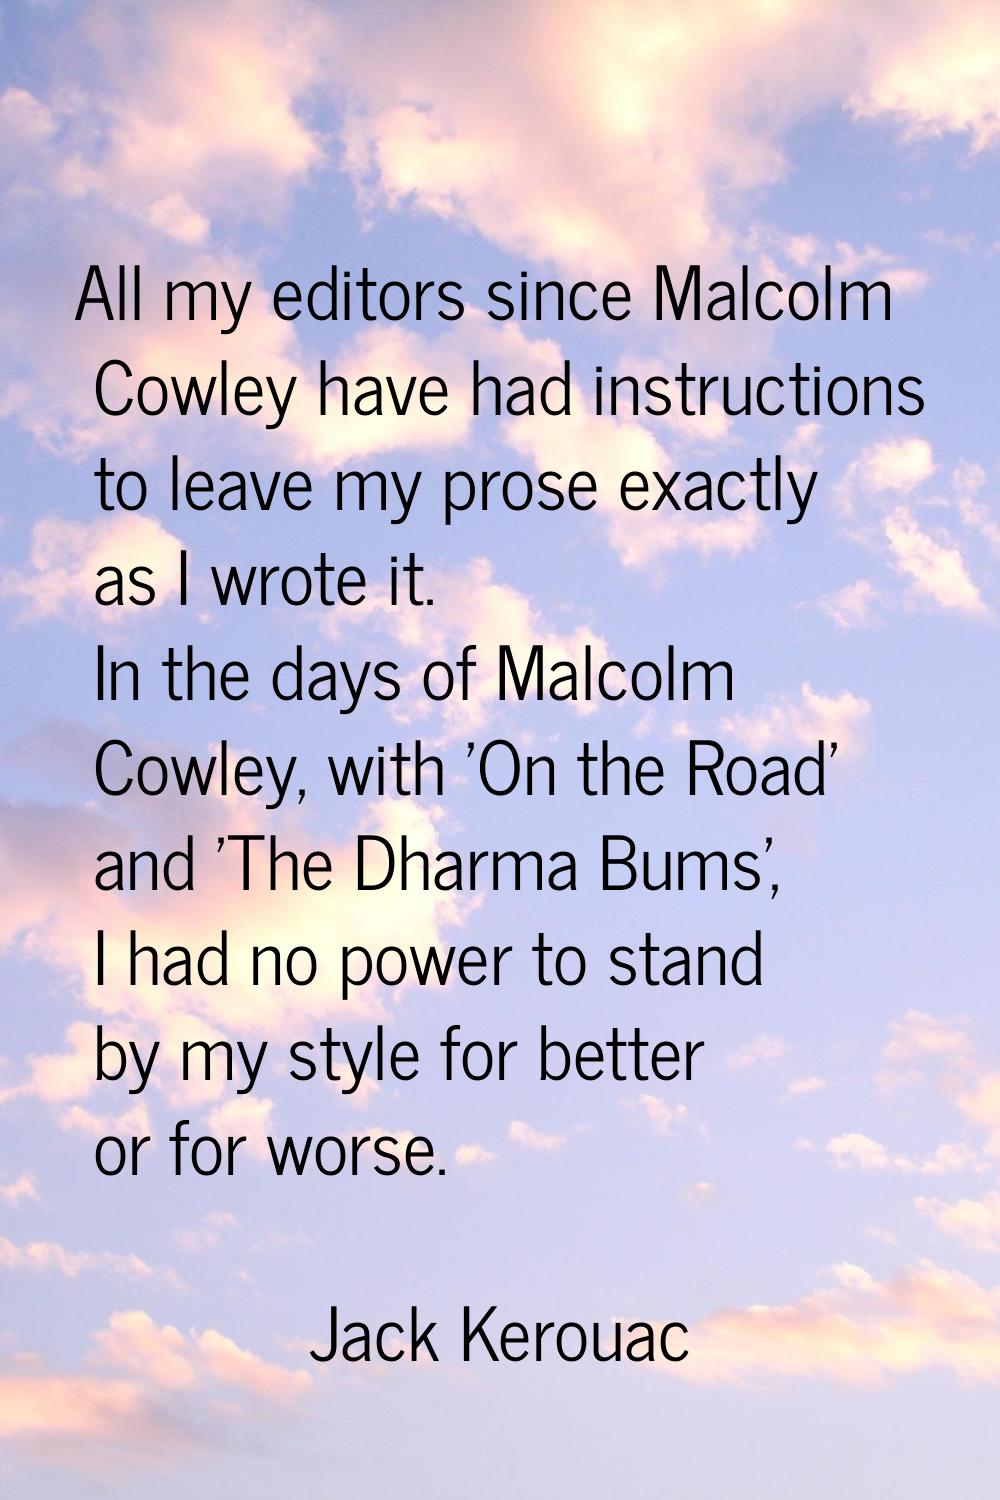 All my editors since Malcolm Cowley have had instructions to leave my prose exactly as I wrote it. 